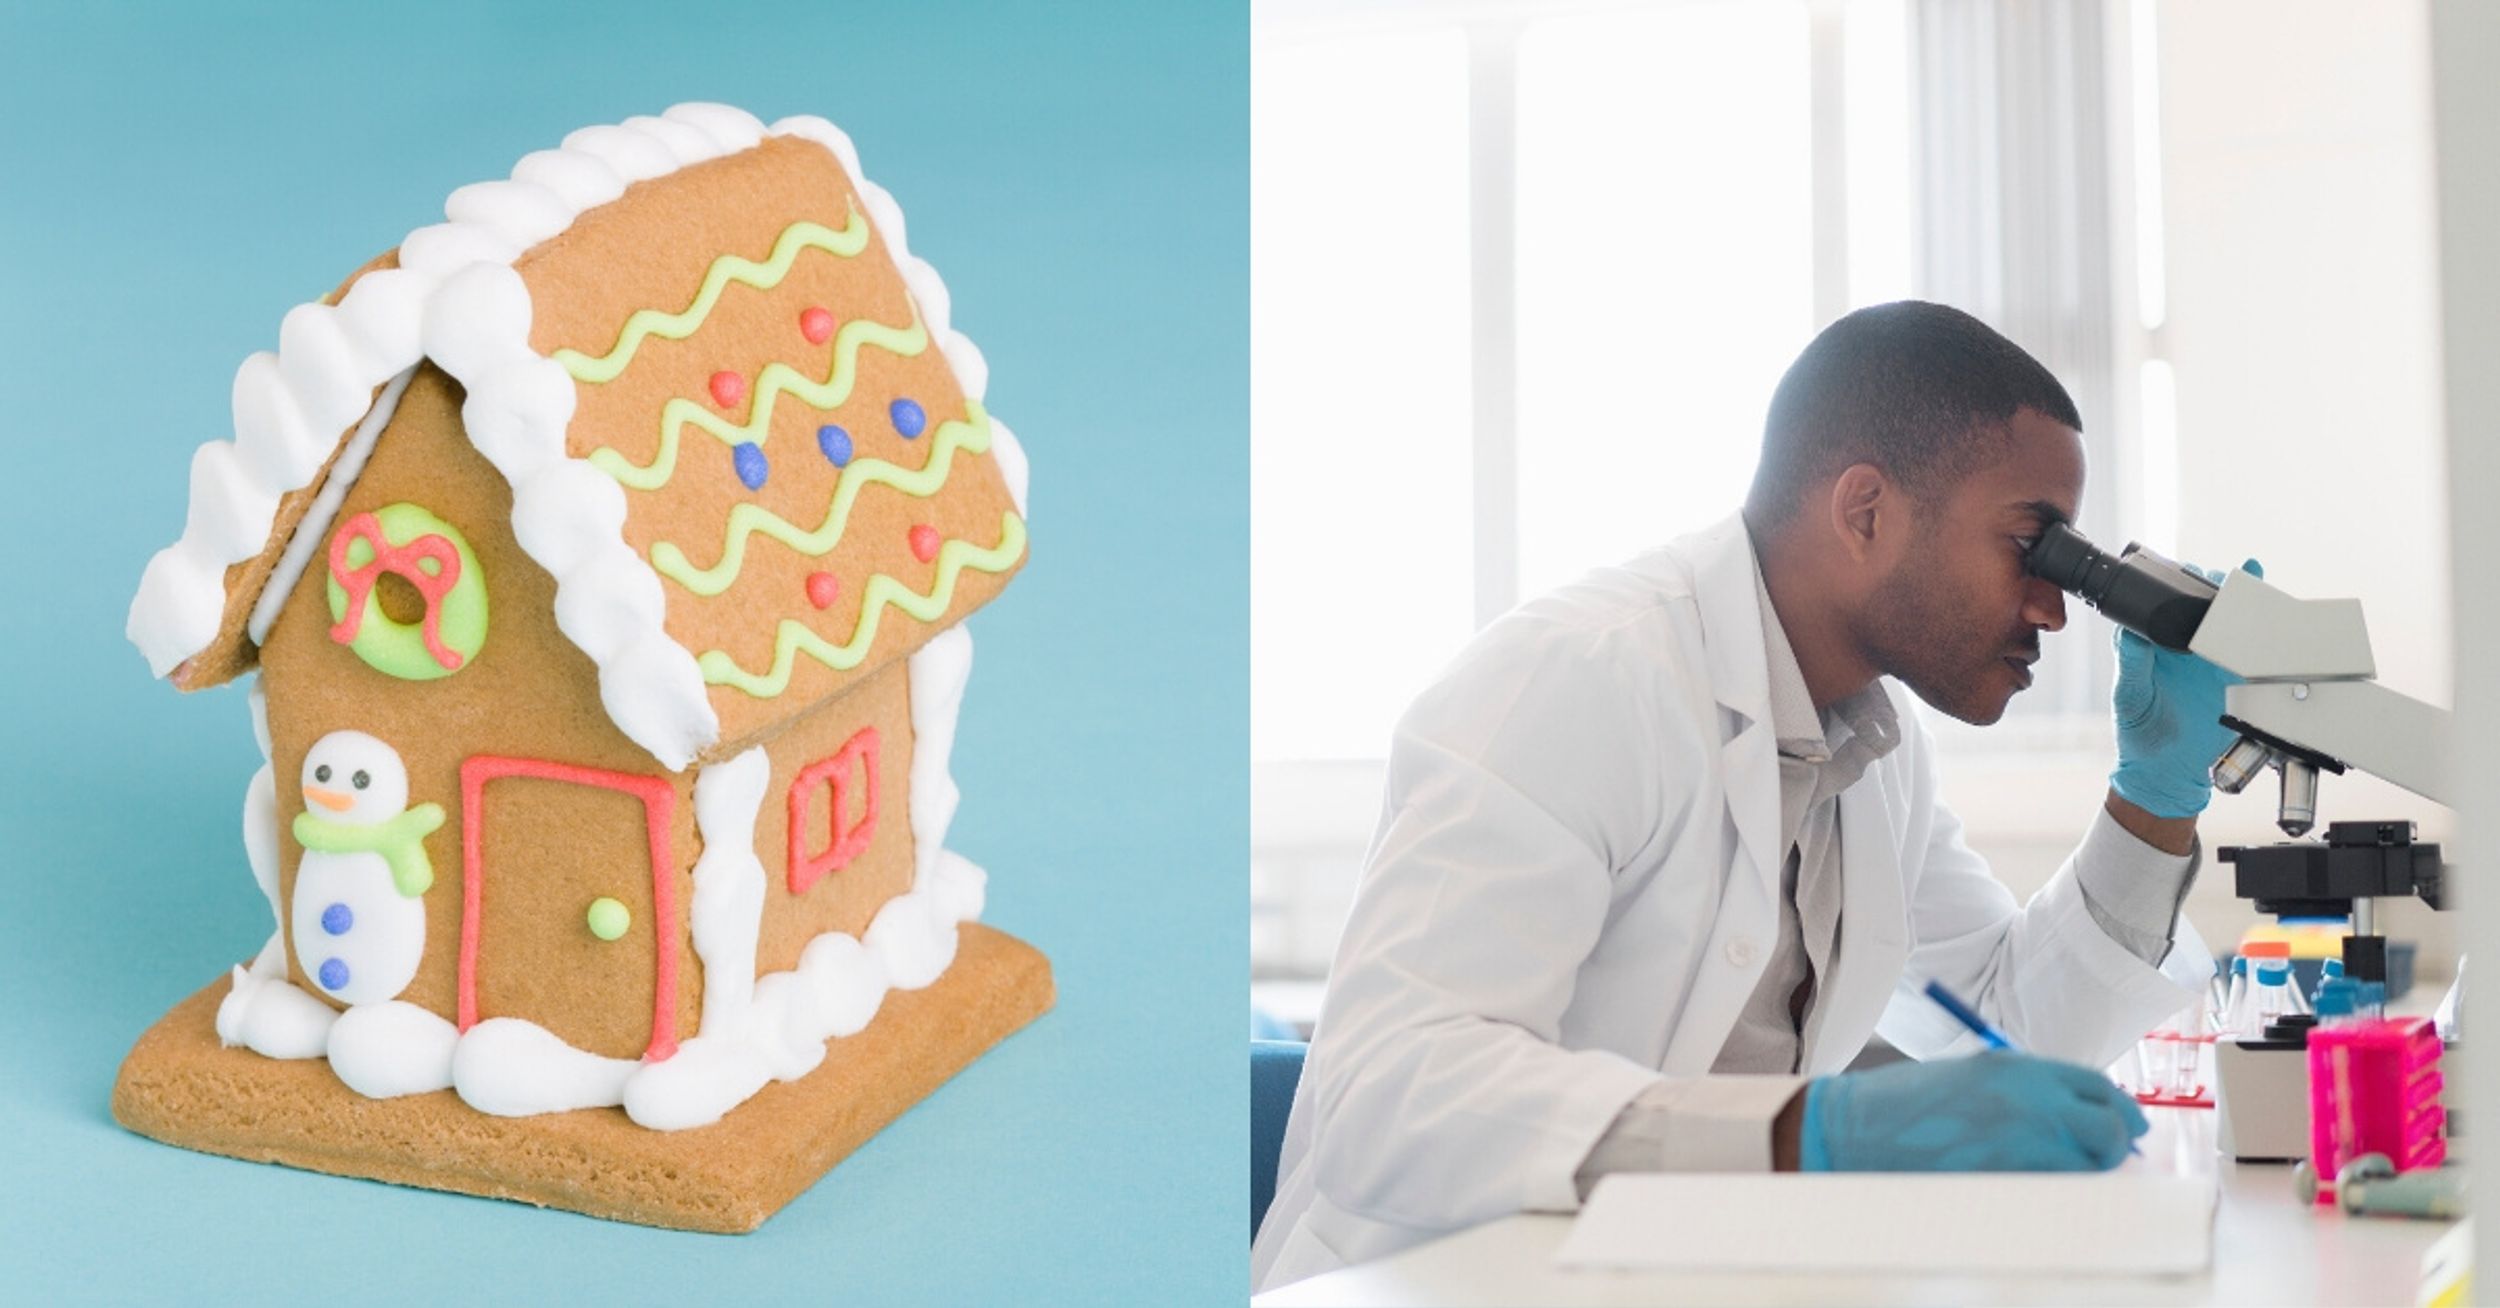 Scientist Creates World's Tiniest 'Gingerbread House' That Is 10 Times Smaller Than The Width Of A Human Hair